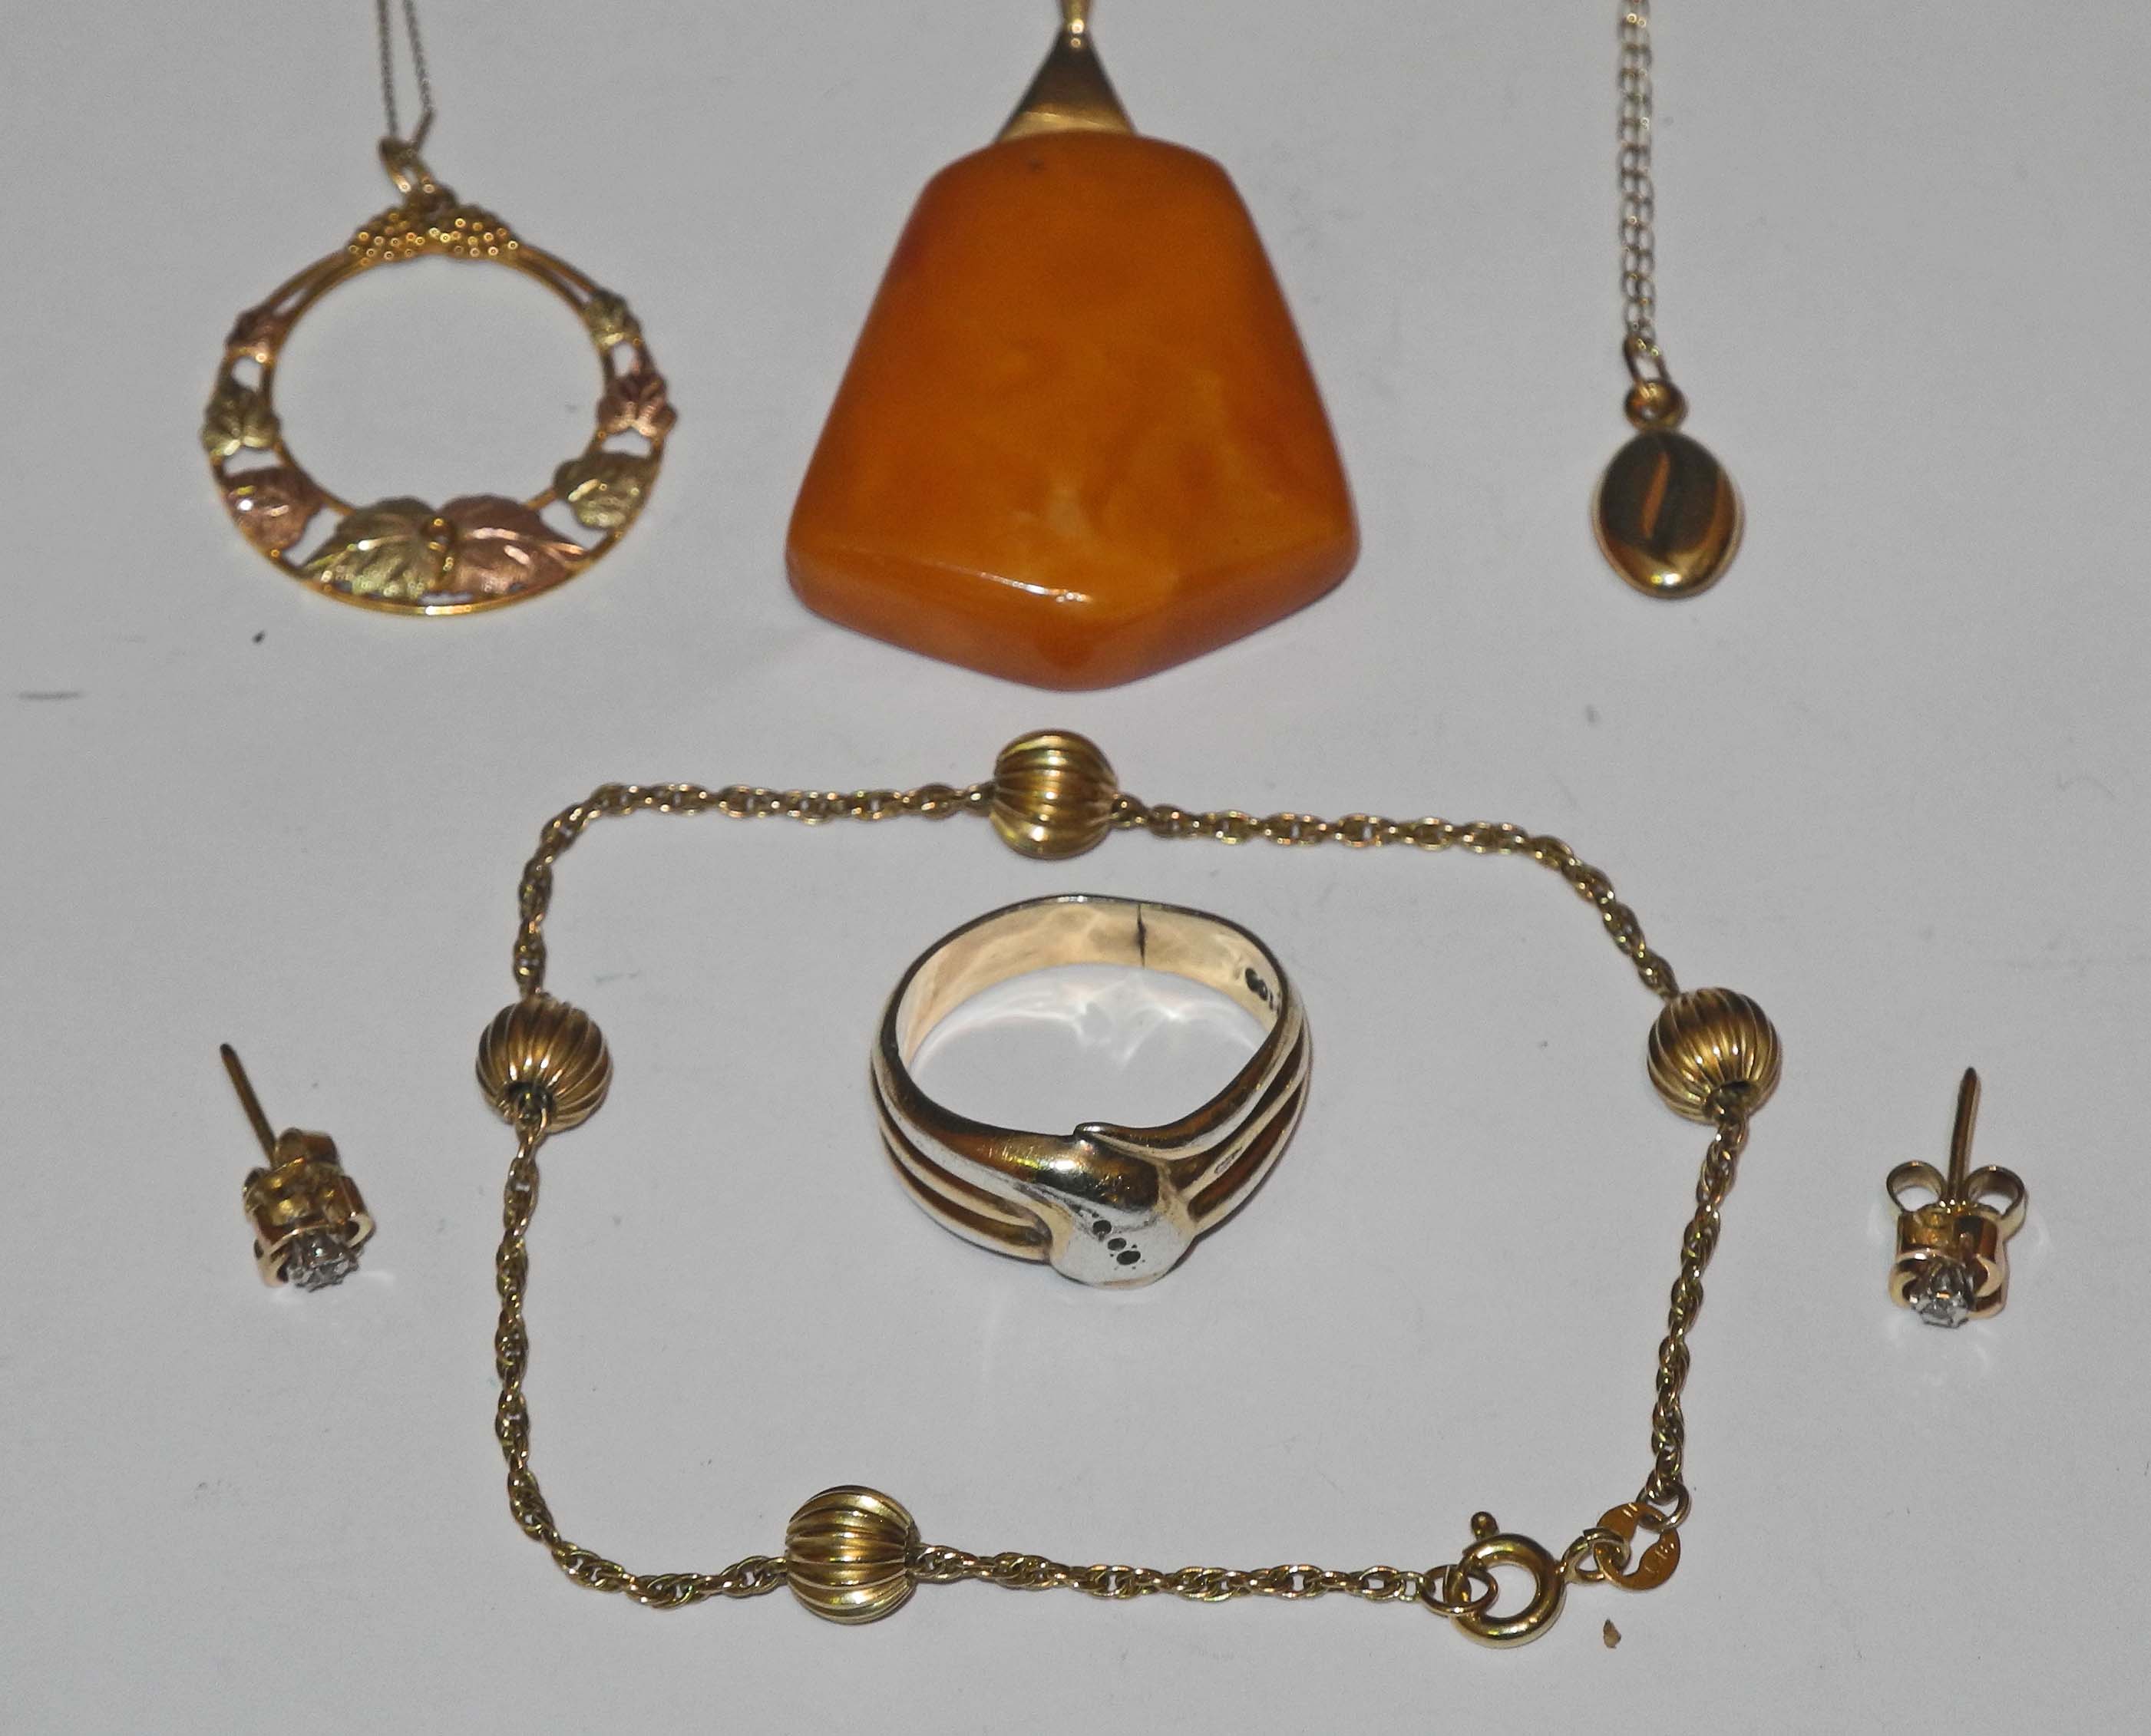 A small collection of 9ct gold jewellery including a necklace, small bangle, amber pendant with